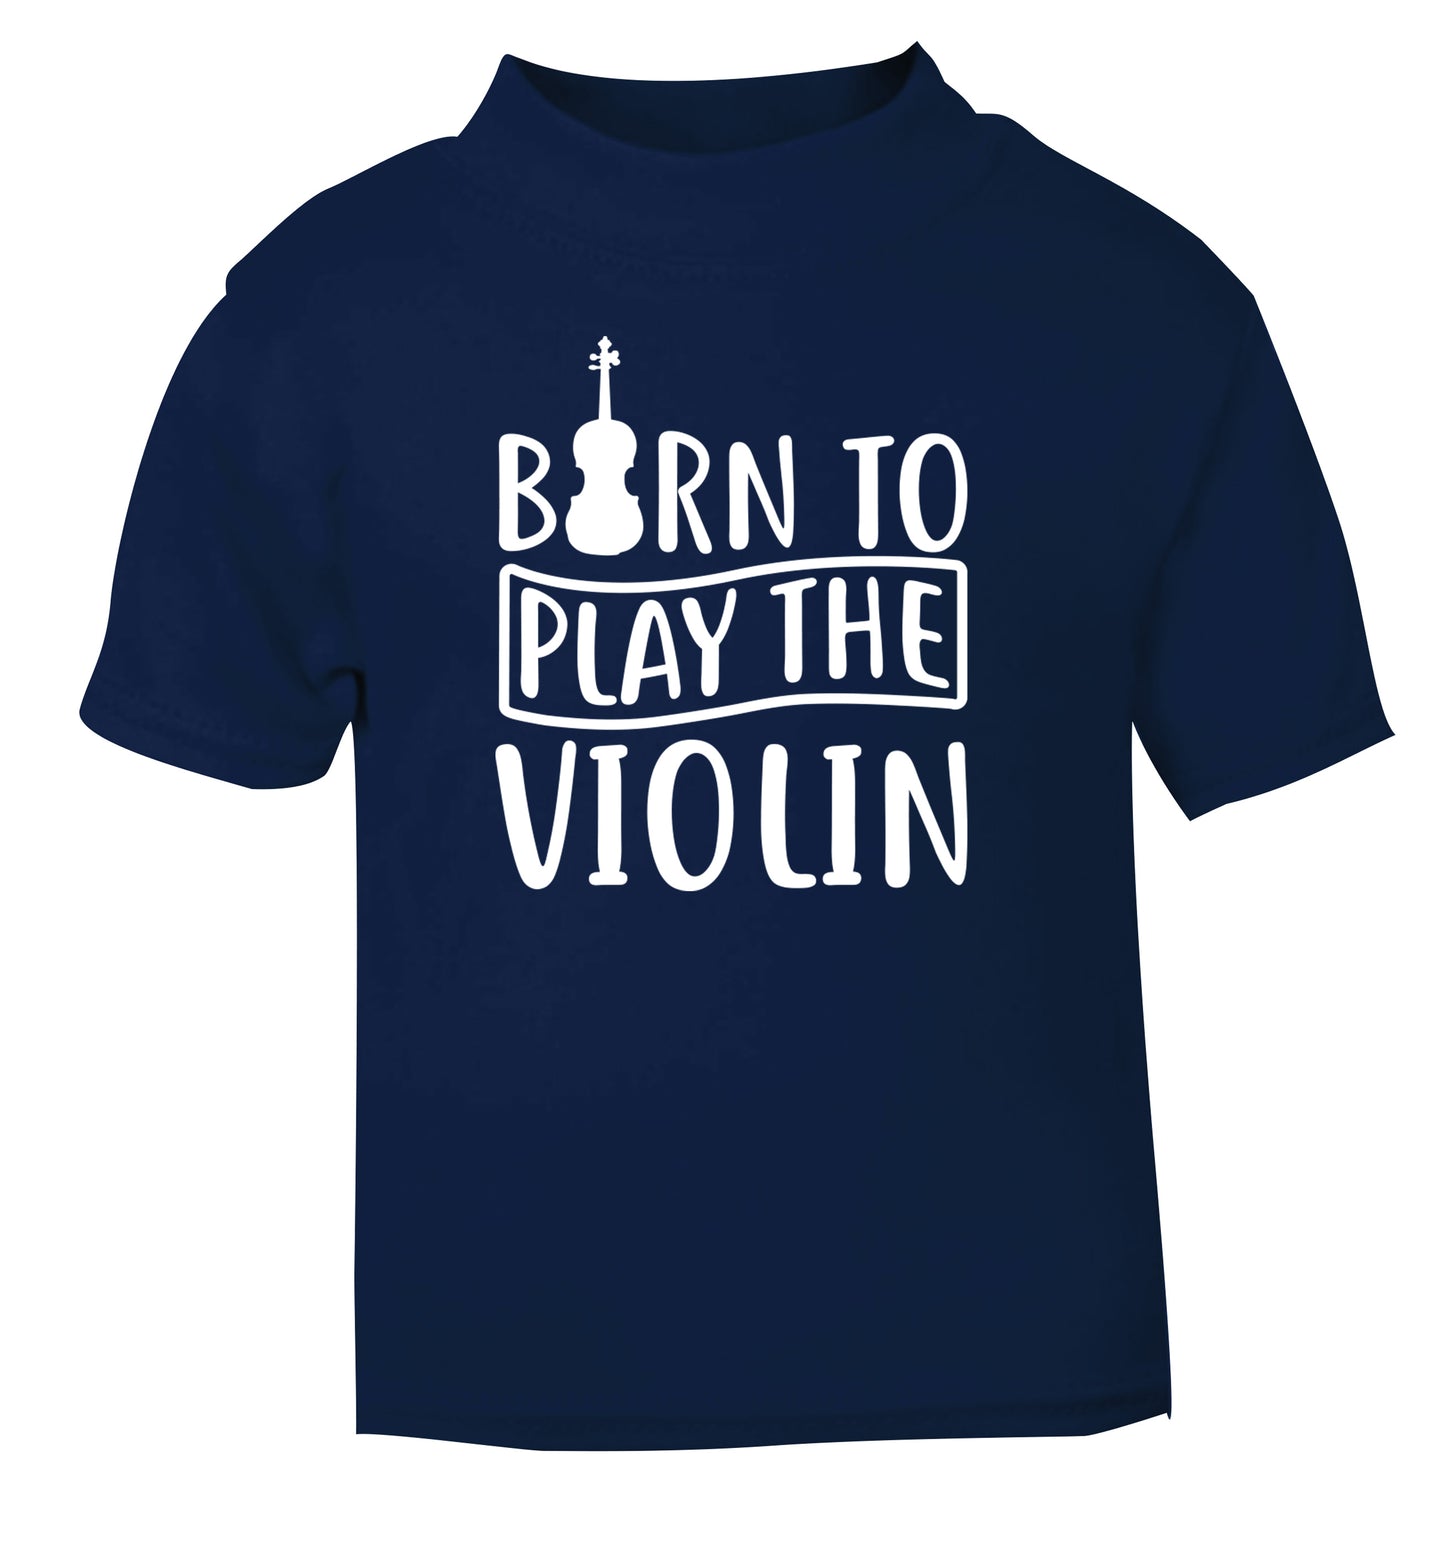 Born to Play the Violin navy Baby Toddler Tshirt 2 Years